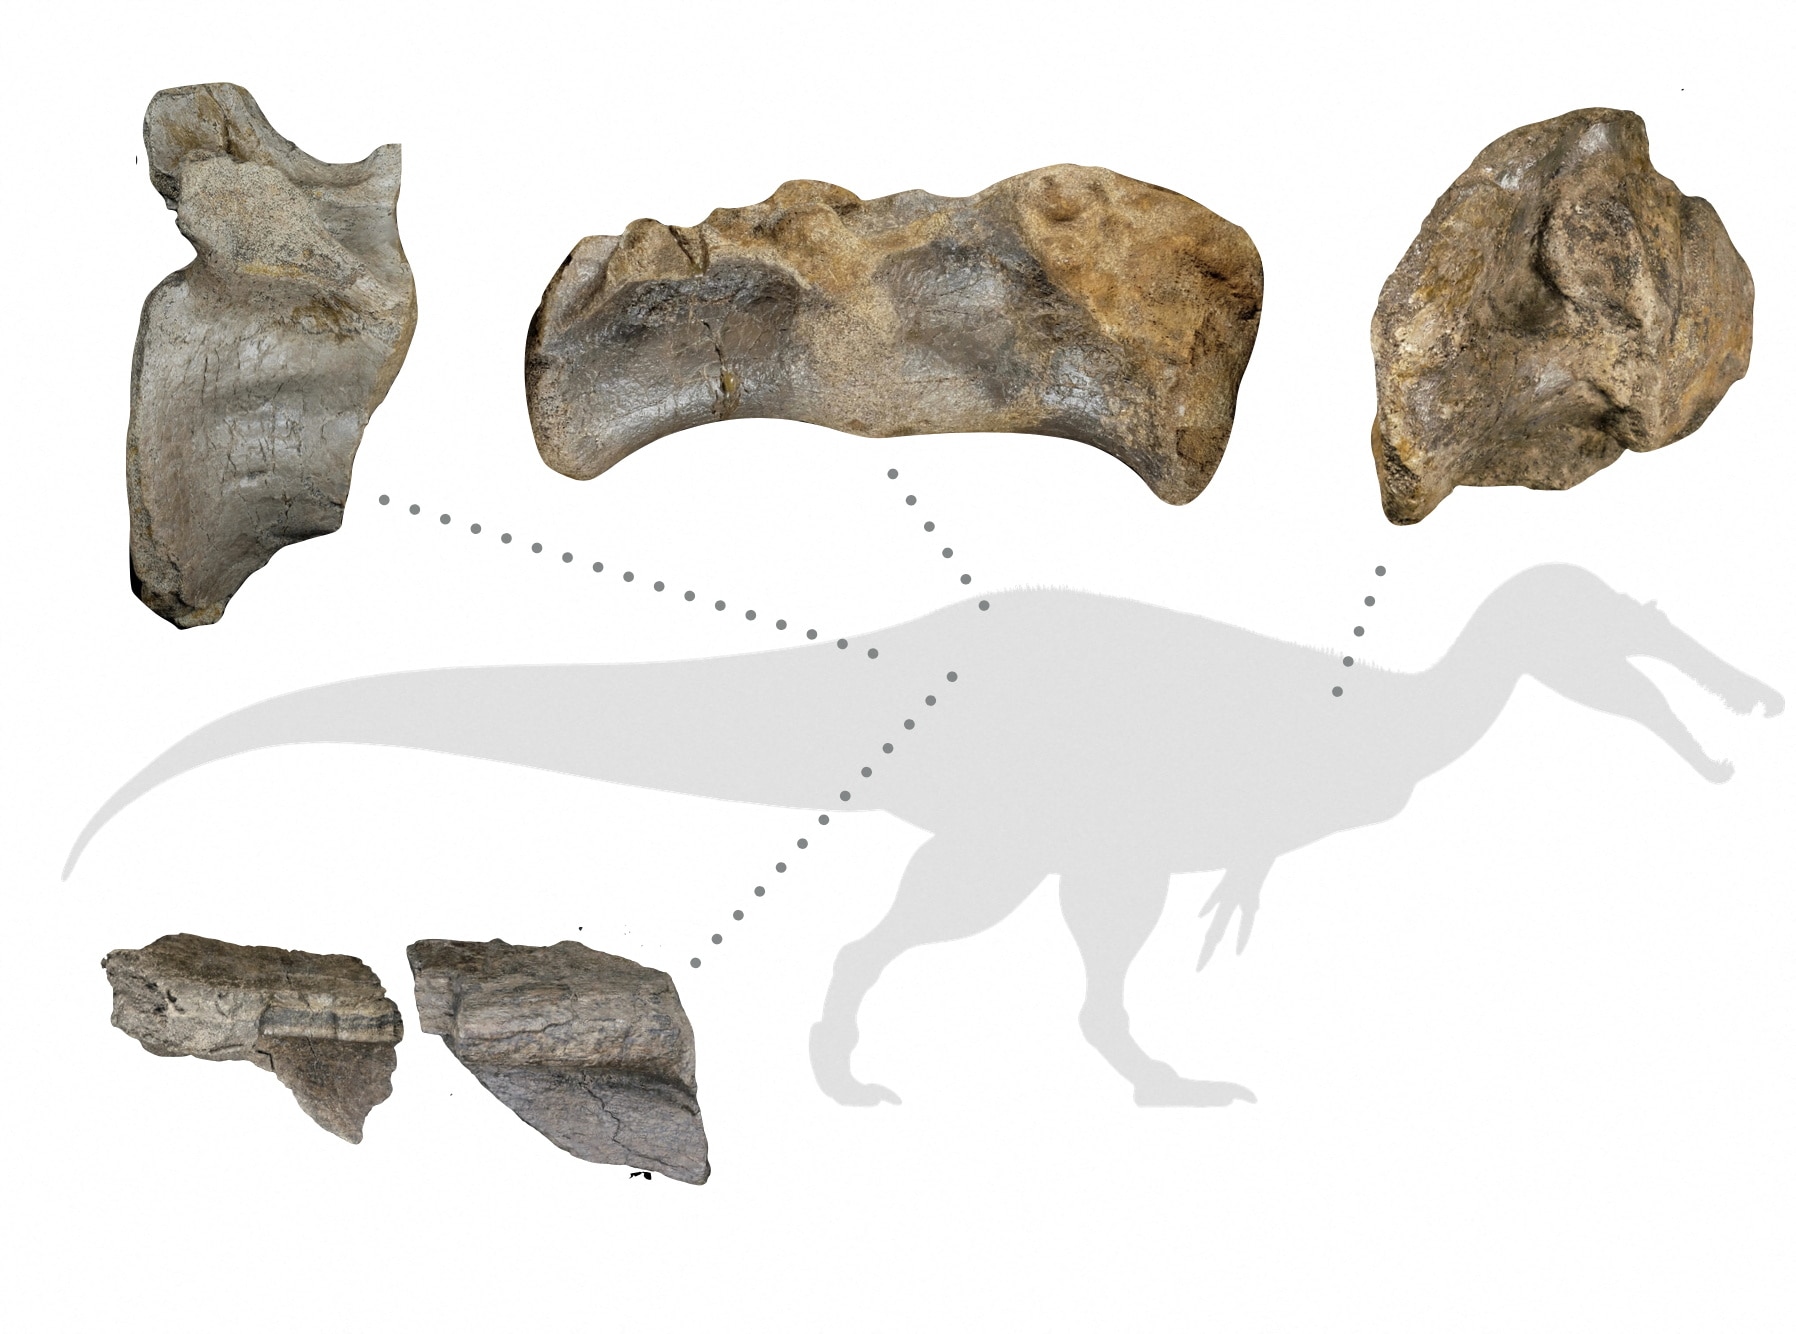 A diagram showing some fossil remains of a dinosaur found on the Isle of Wight